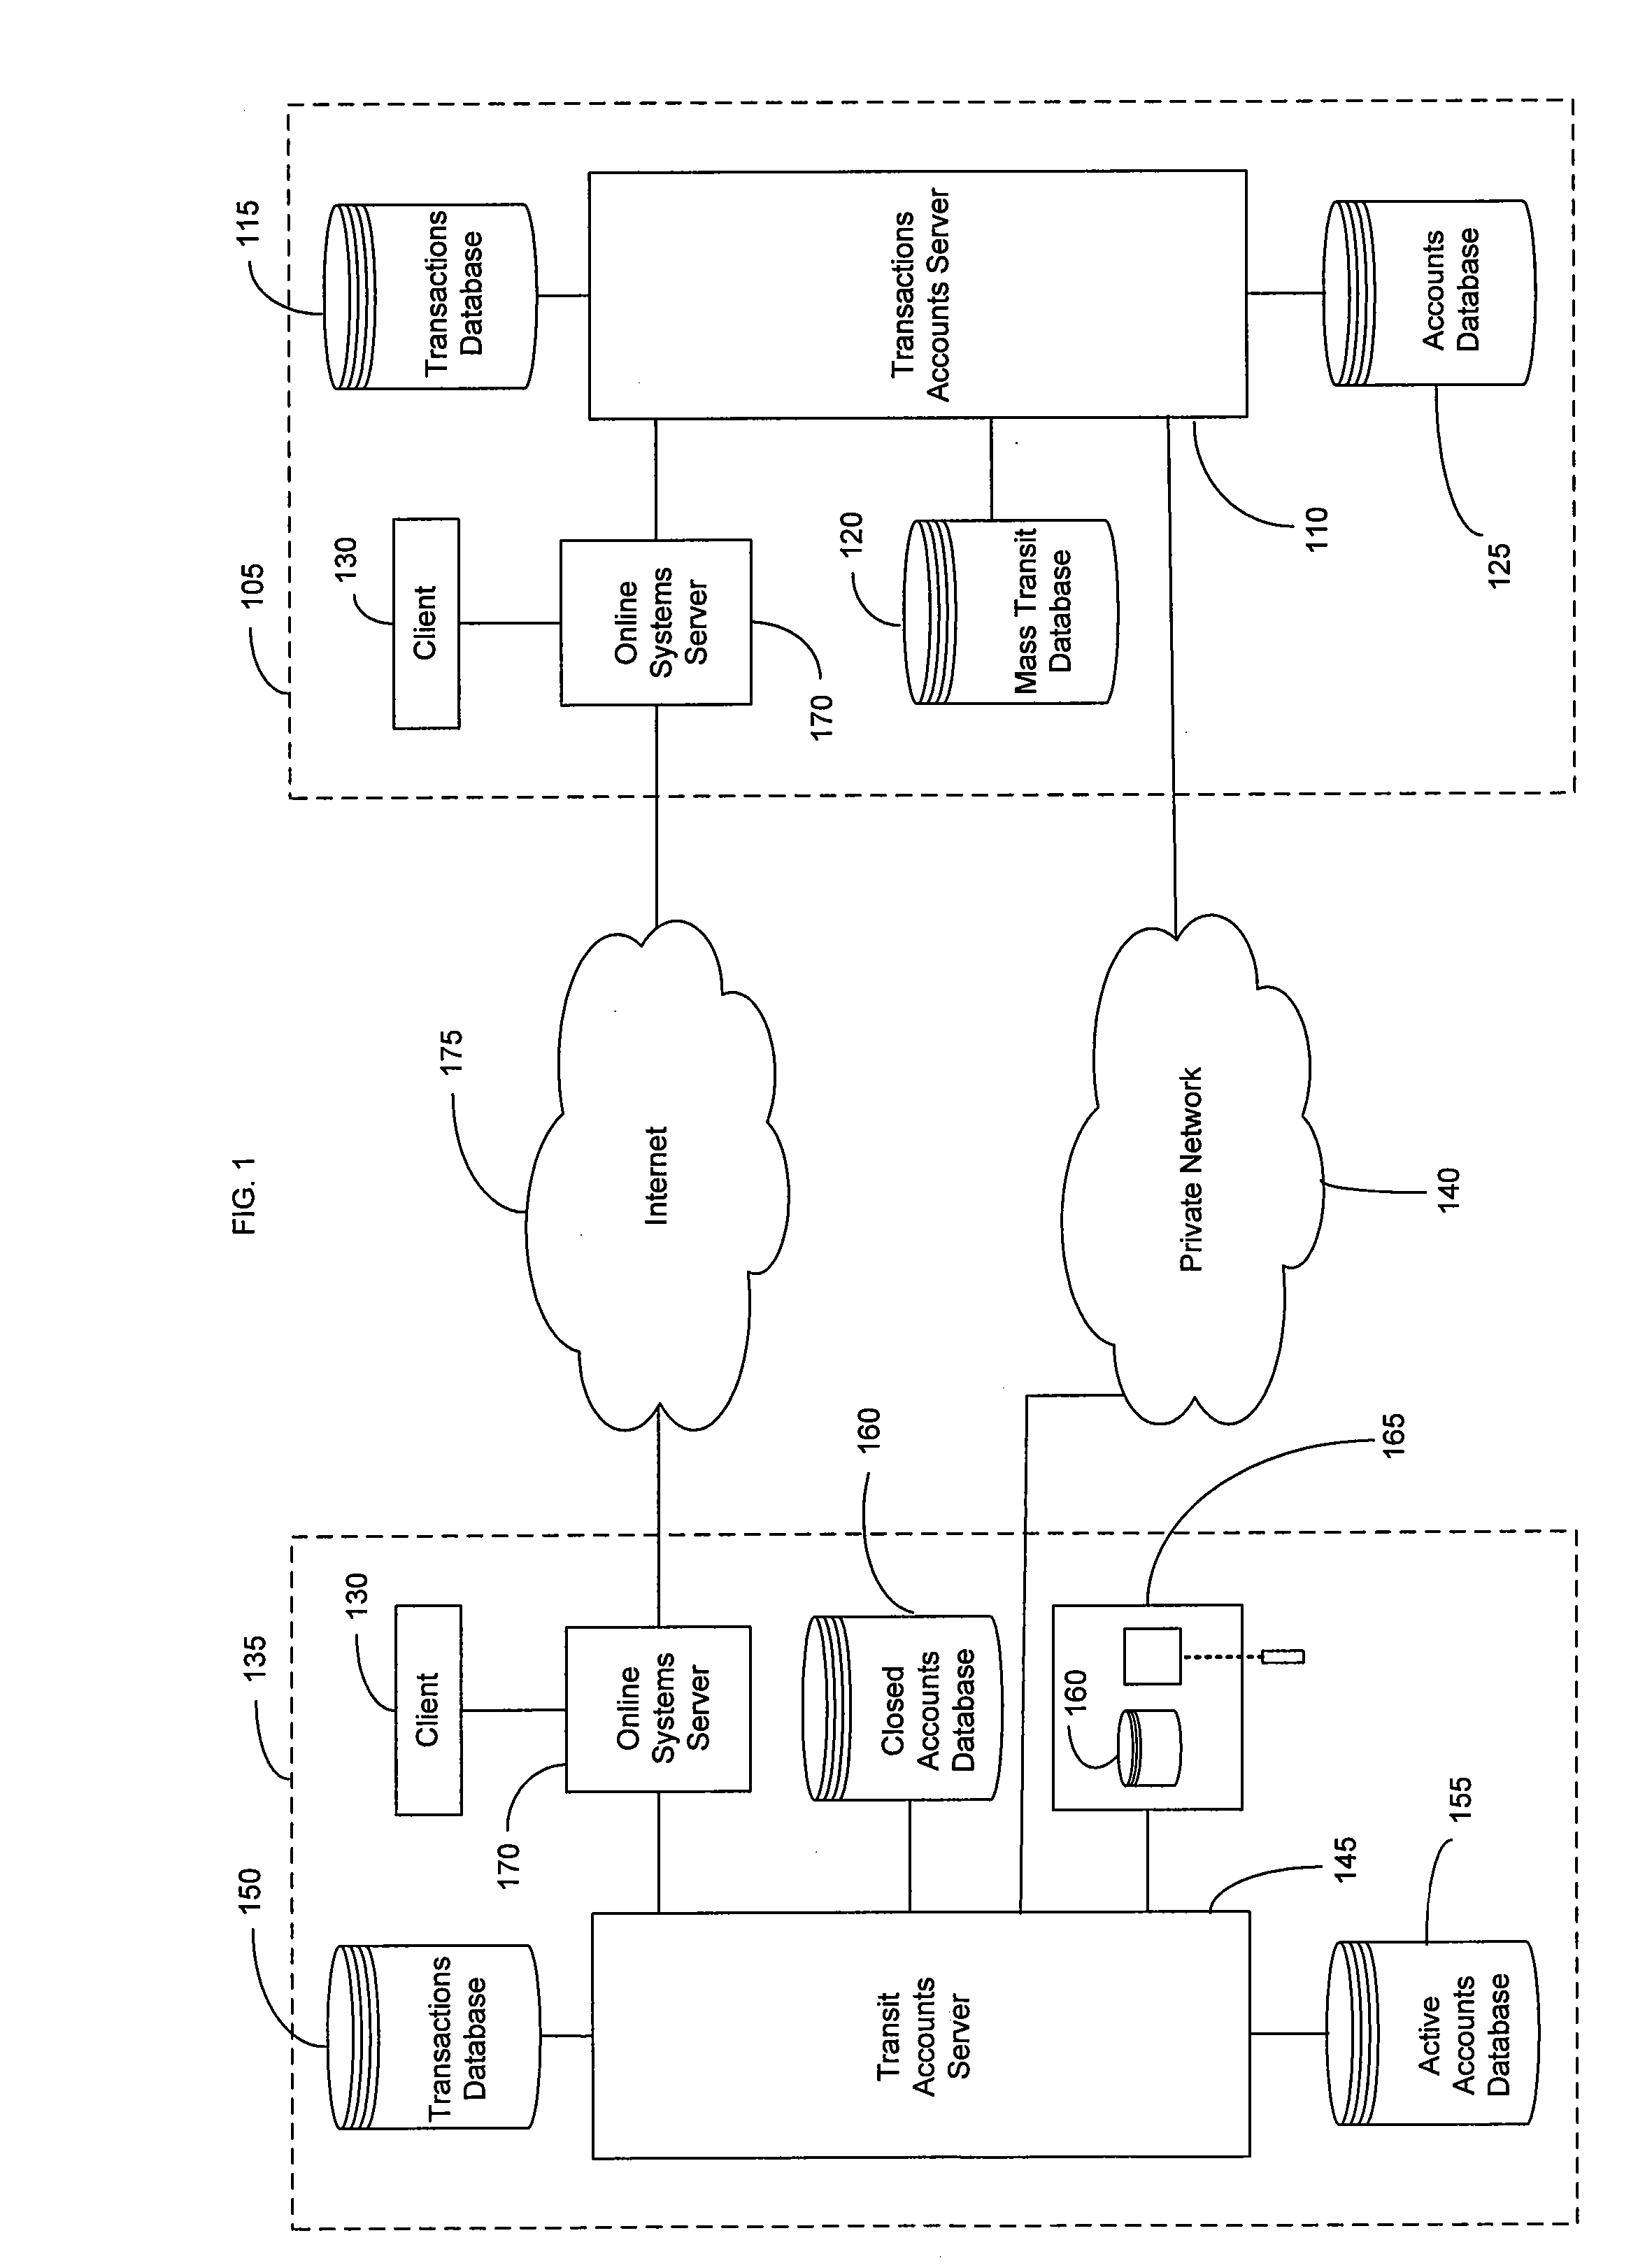 System and method for mass transit merchant payment